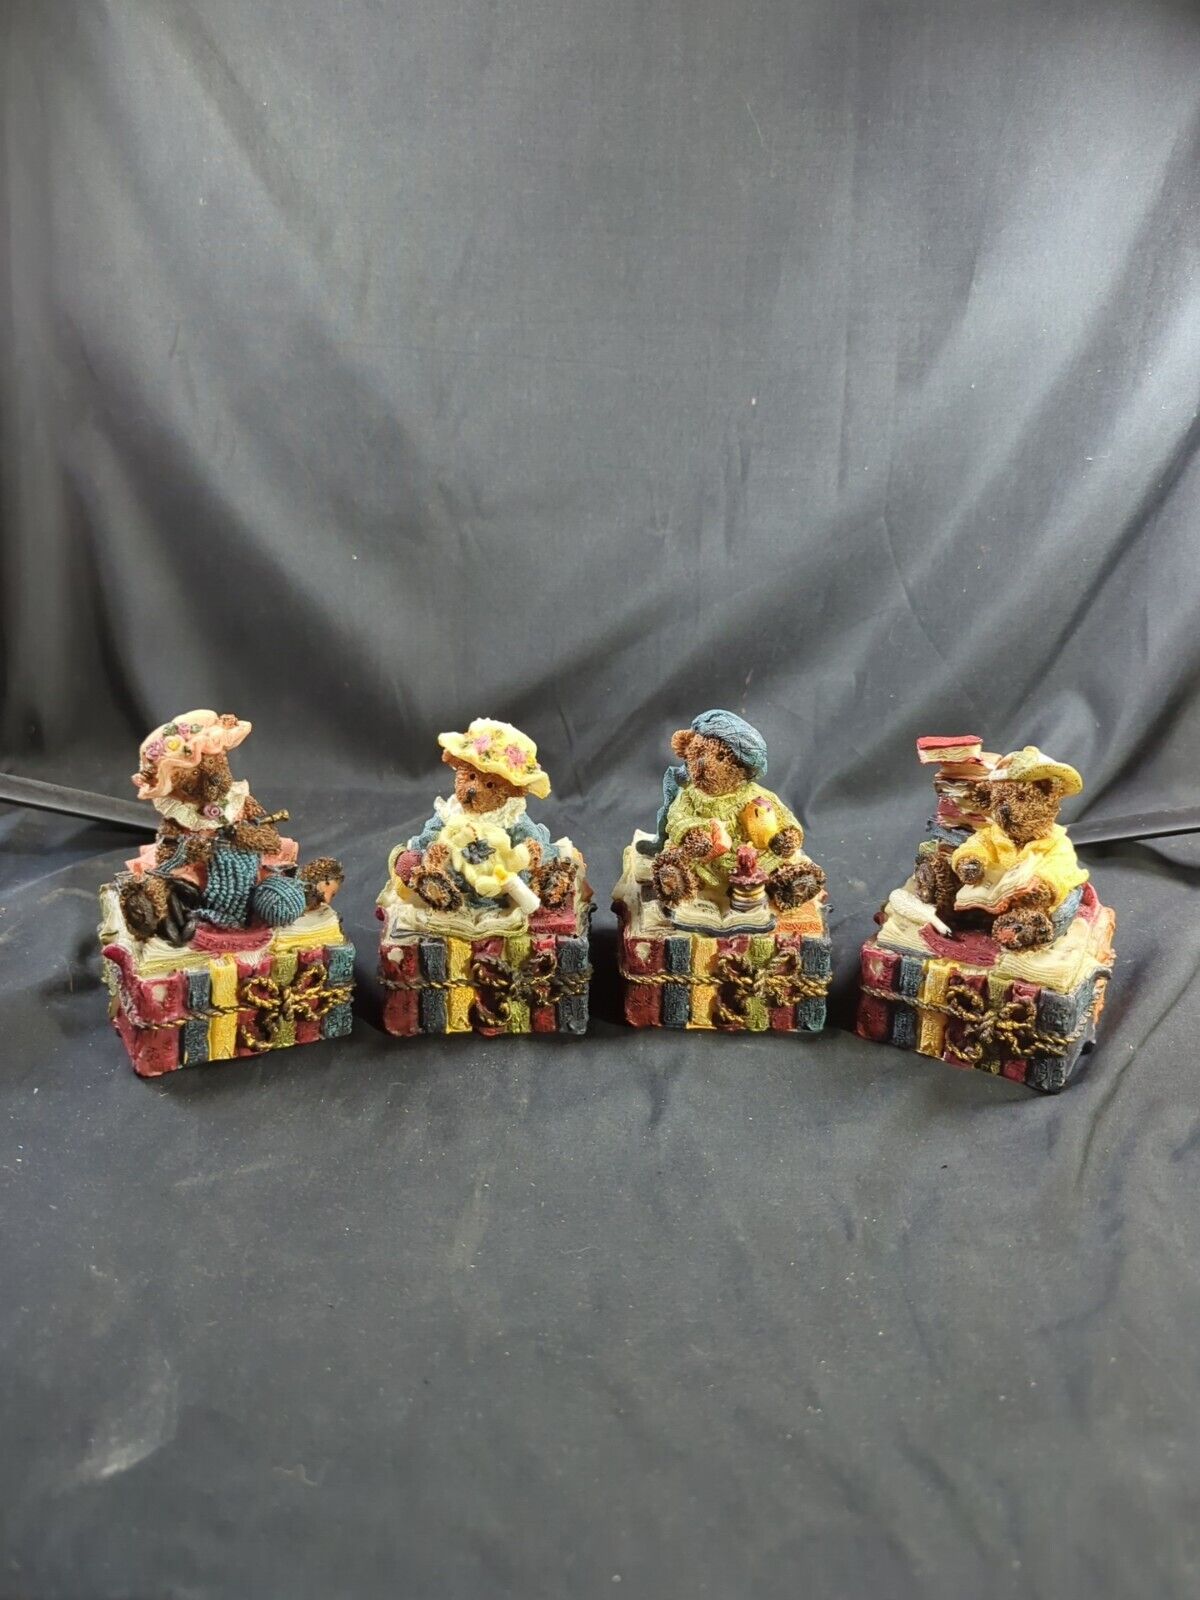 Lot 4 Vintage Resin Musical Fancy Bears Sitting On Stacked Books Bunny Knit Rare